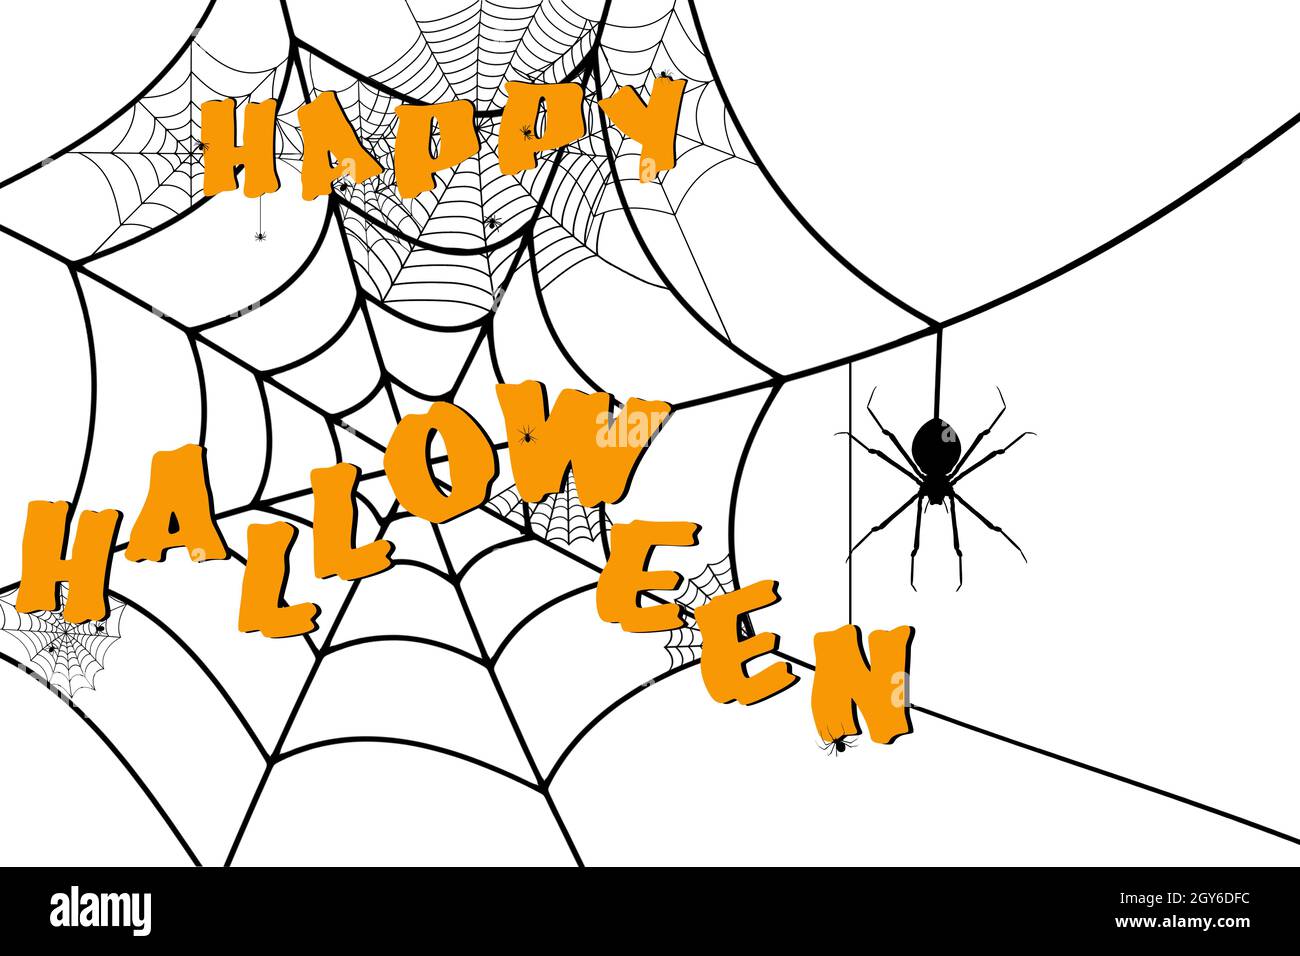 Halloween Concept background with a spiders are making webs and the characters Happy Halloween on the webs. Stock Photo